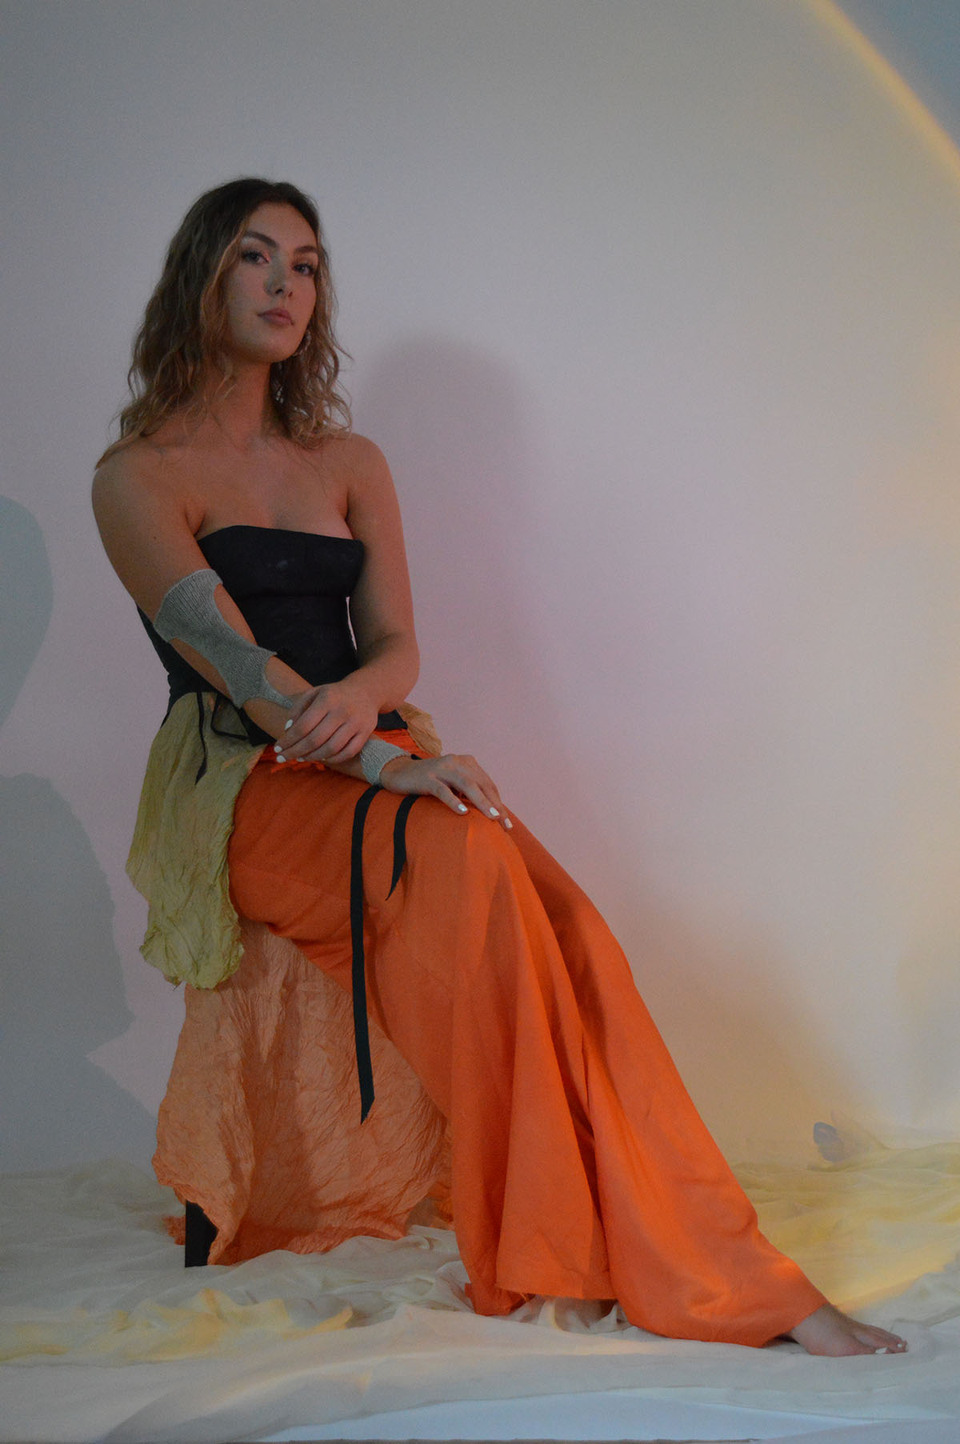 Barefoot, seated female model wearing black bodice and orange skirt designs inspired by Botticelli's 'The Birth of Venus'